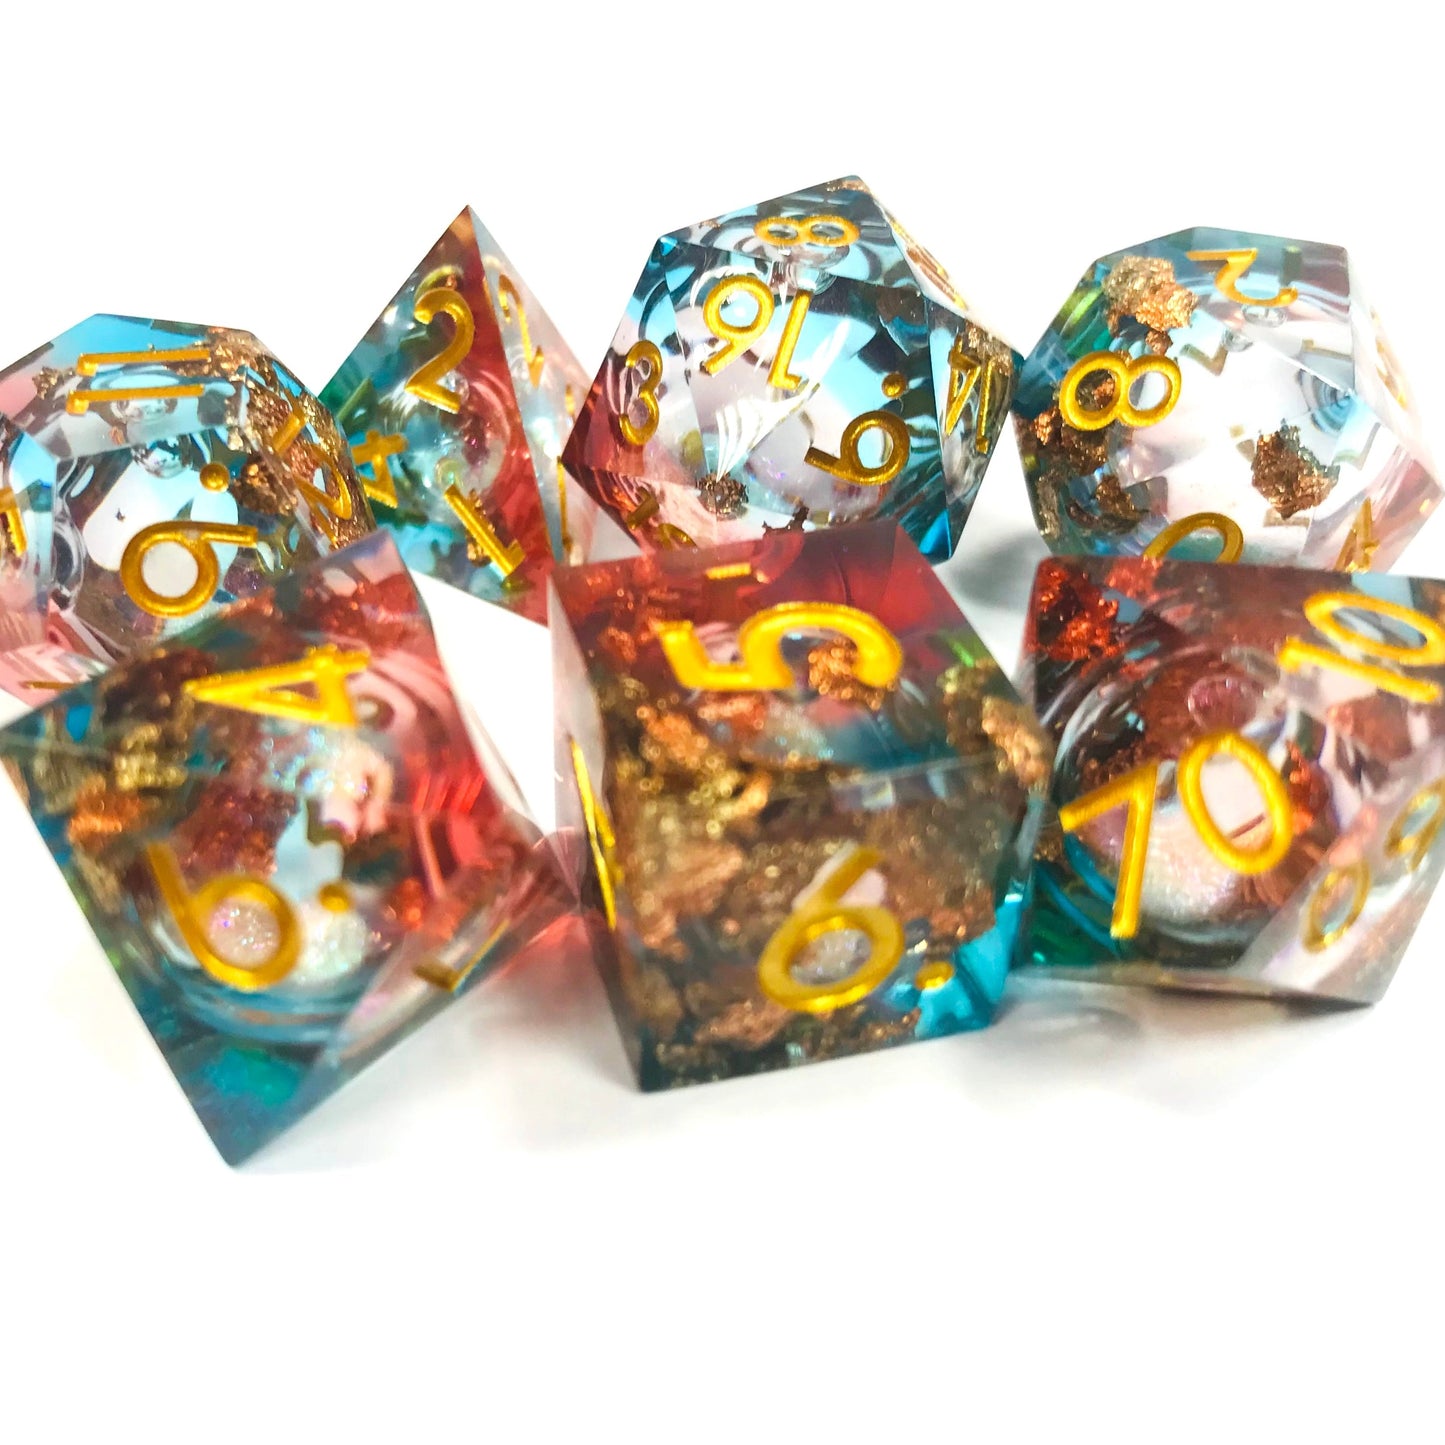 Twist of Fate sharp edge with liquid core dnd dice set for critical critters, dice goblin and dice dragon collectors